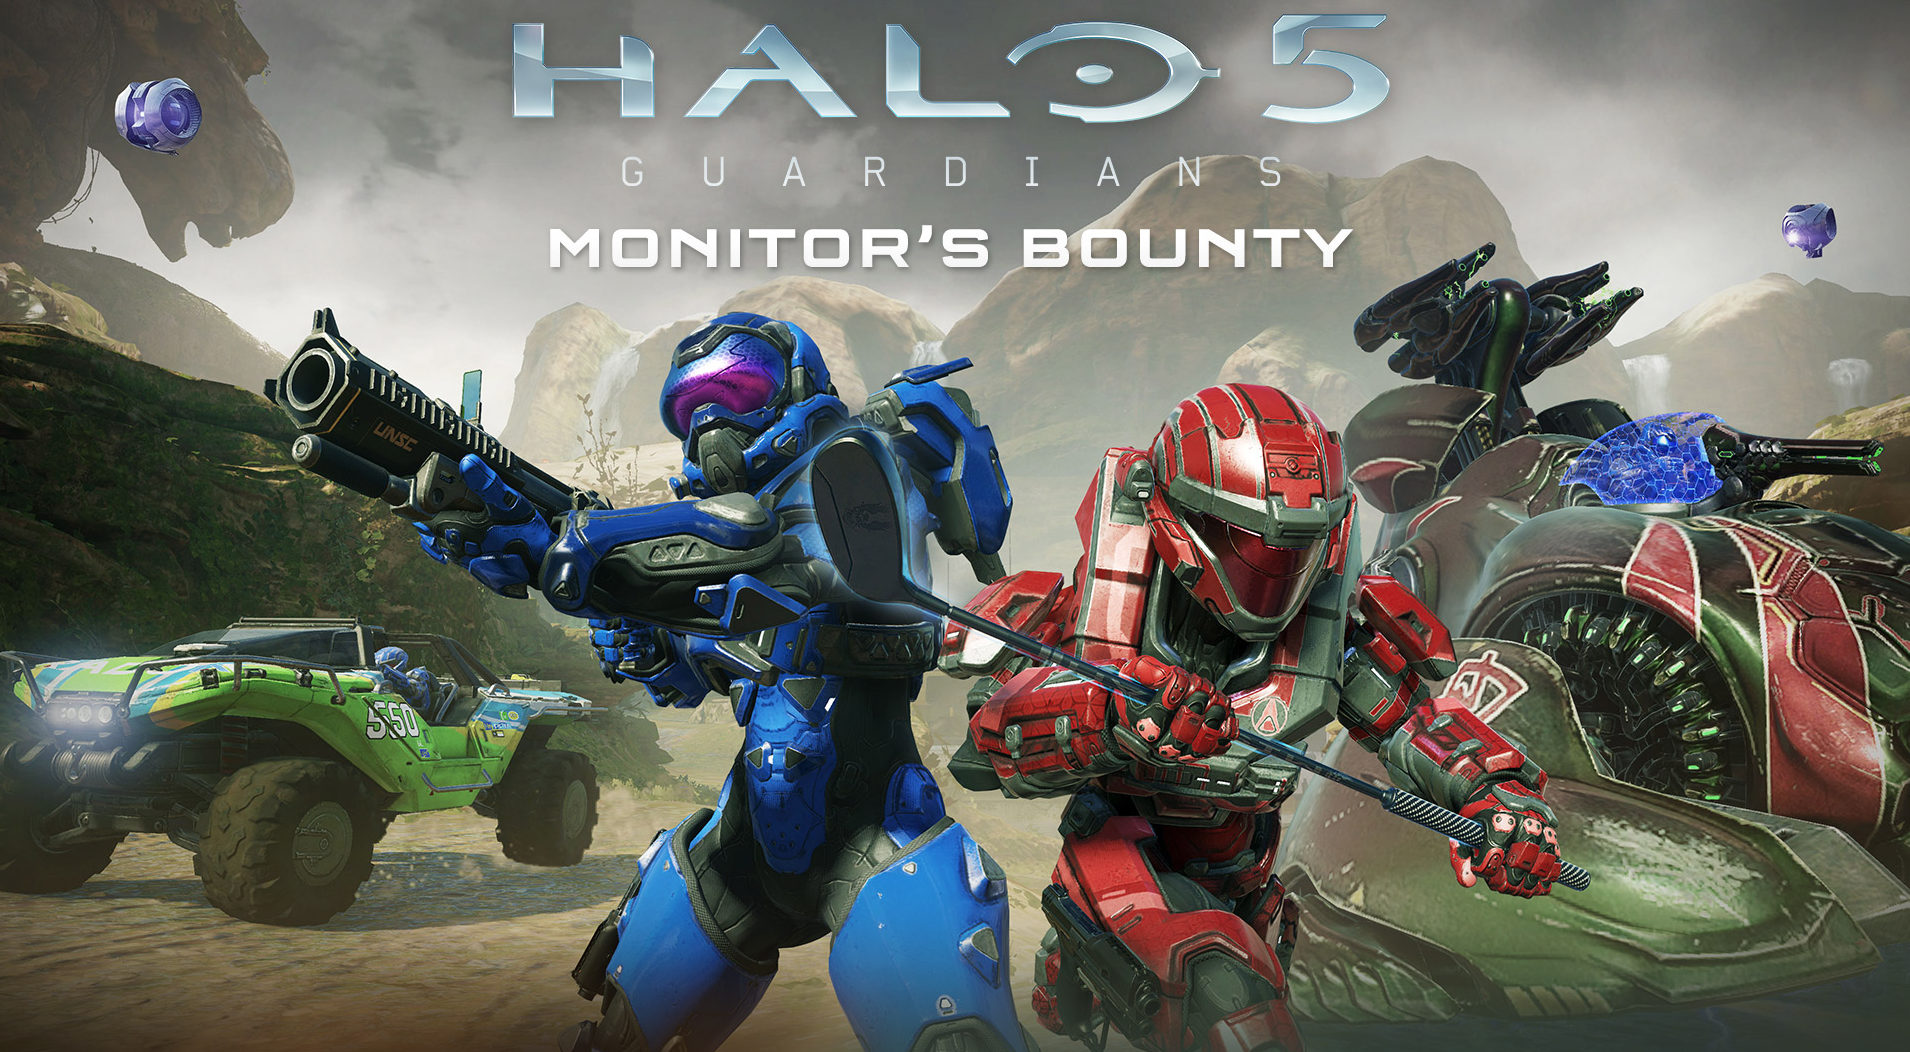 Can Halo 5 Be Played On Pc?